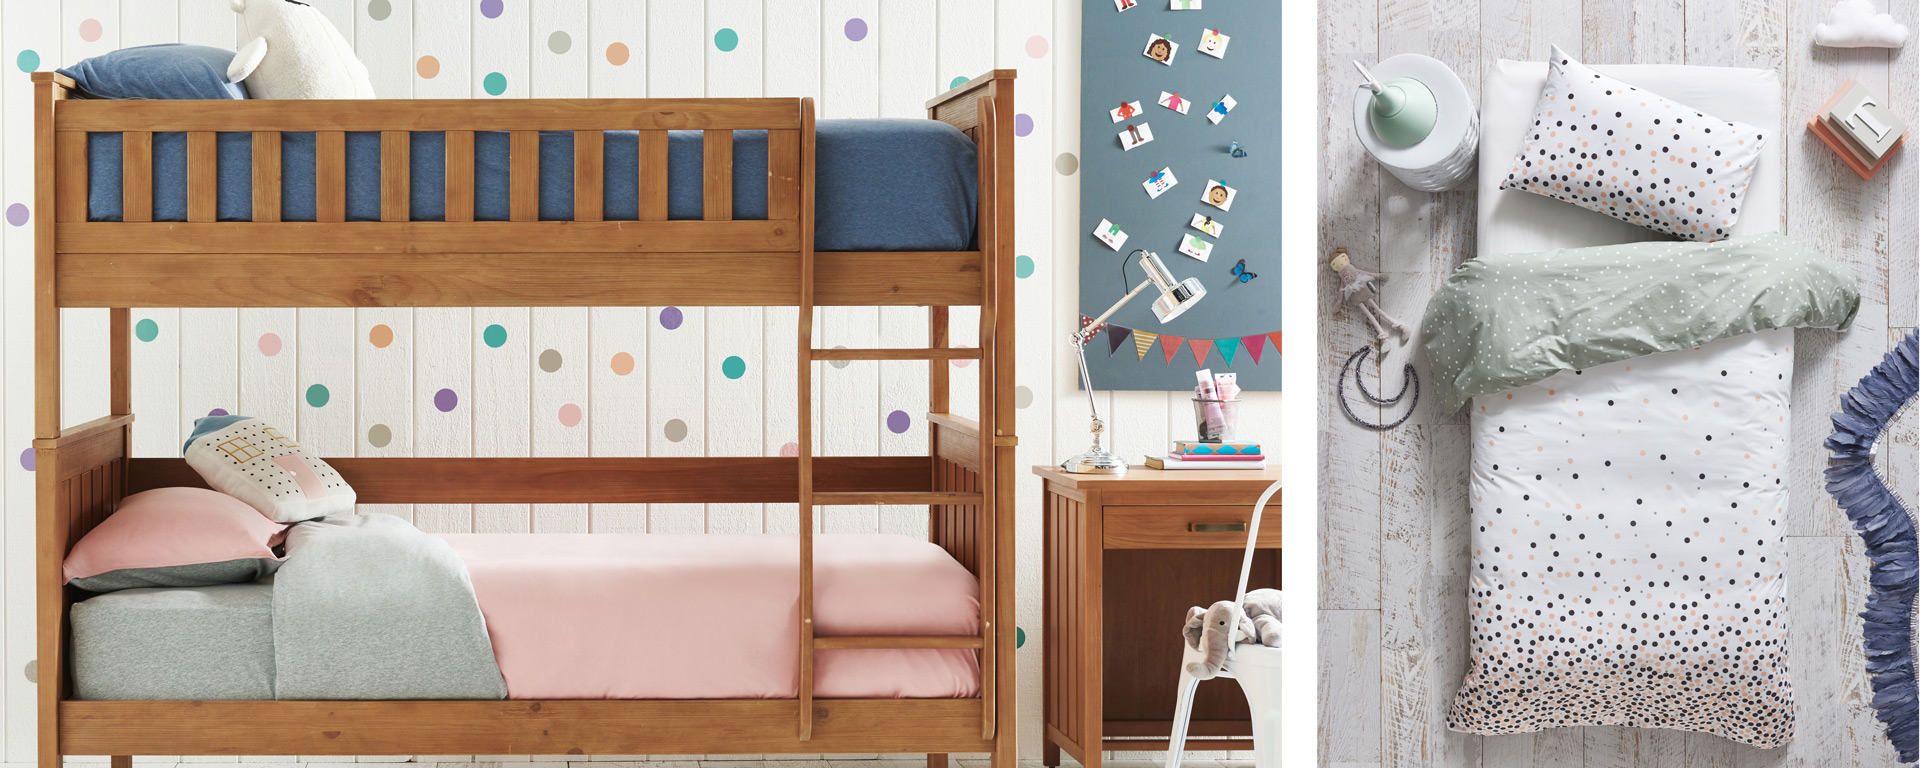 Our Best Bunk Beds And Quilt Covers For, Bunk Bed Duvet Covers